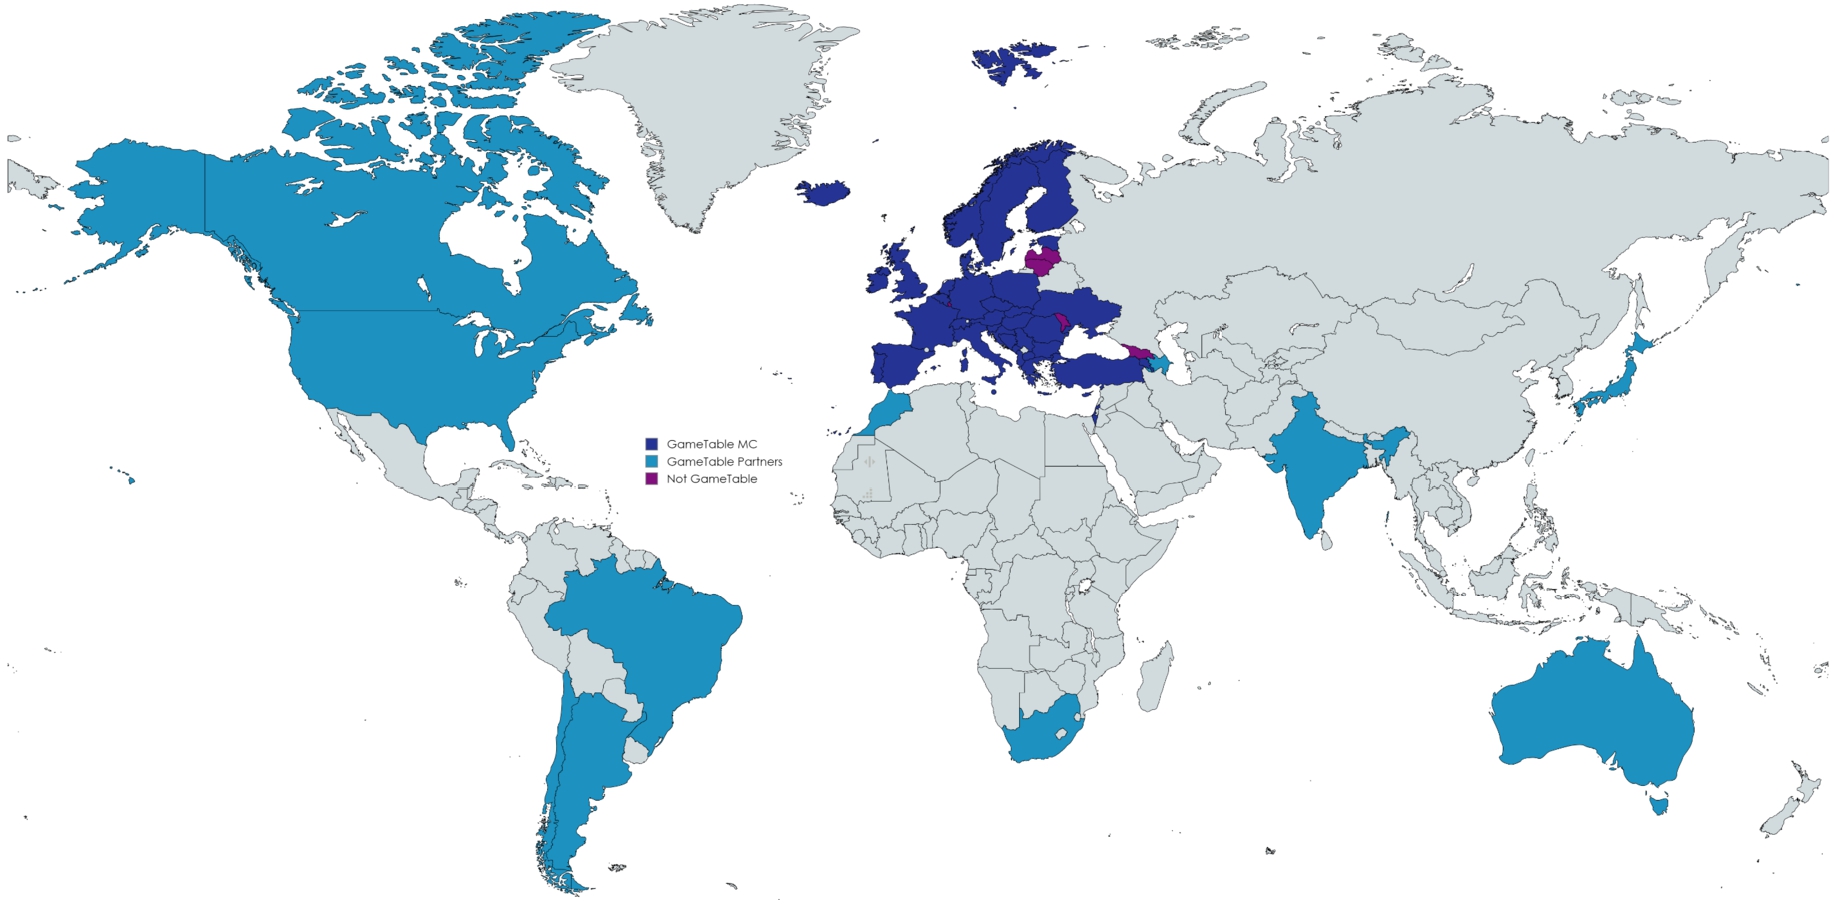 Countries represented within GameTable WG members.